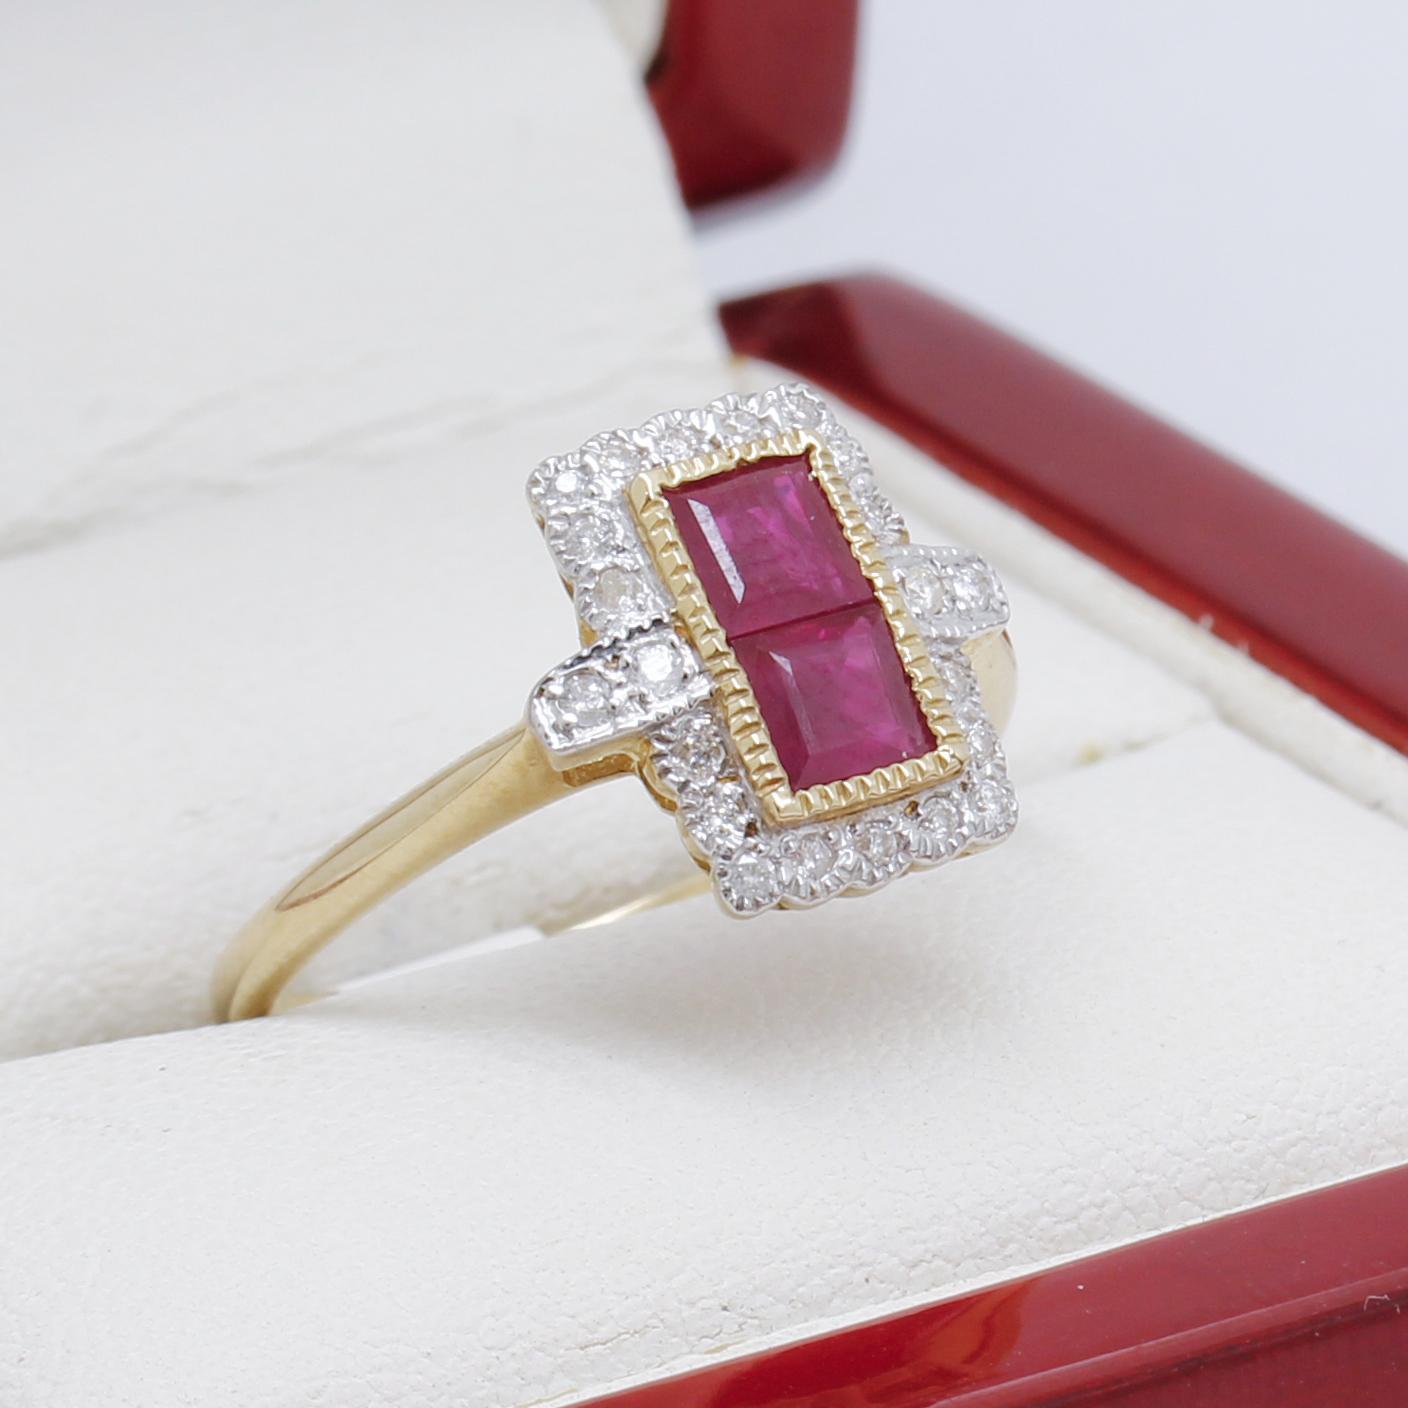 Princess Cut Art Deco Style Ruby & Diamond Ring, New For Sale